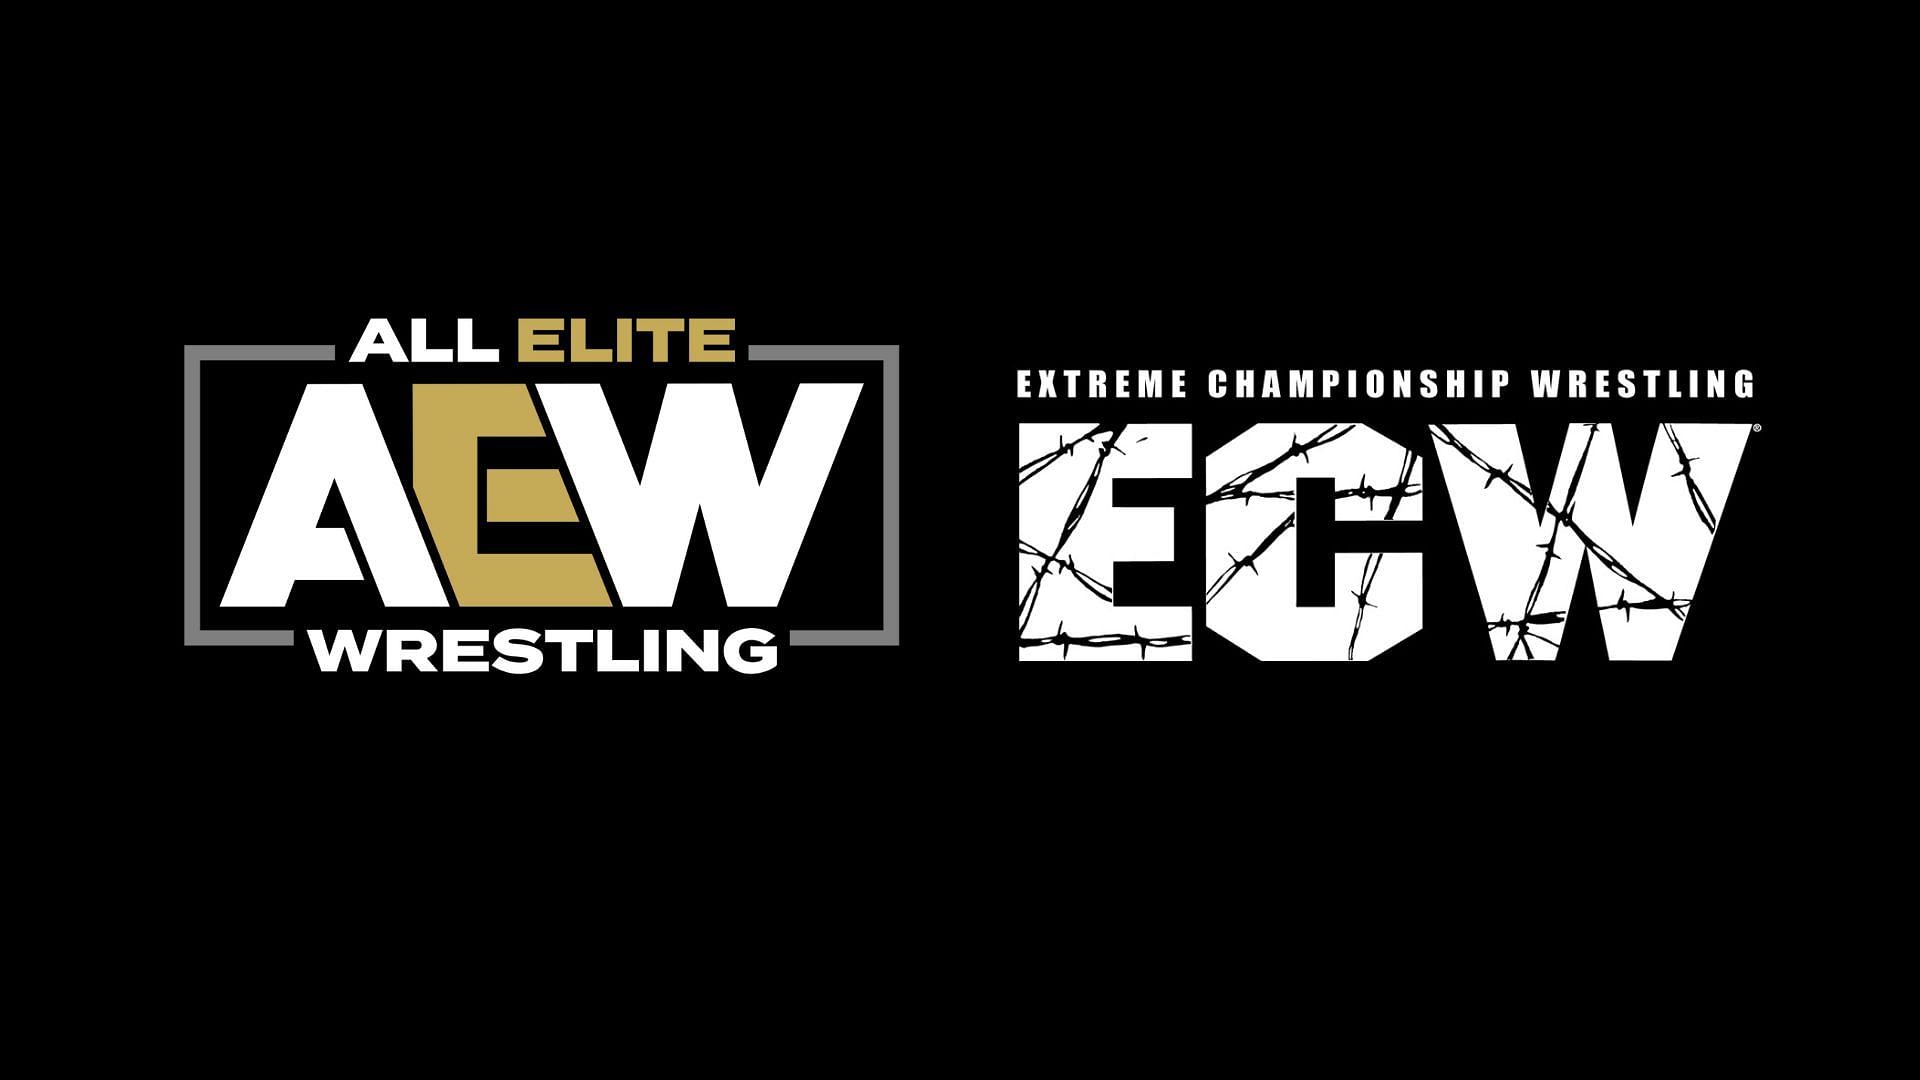 AEW and ECW are examples of wrestling promotions